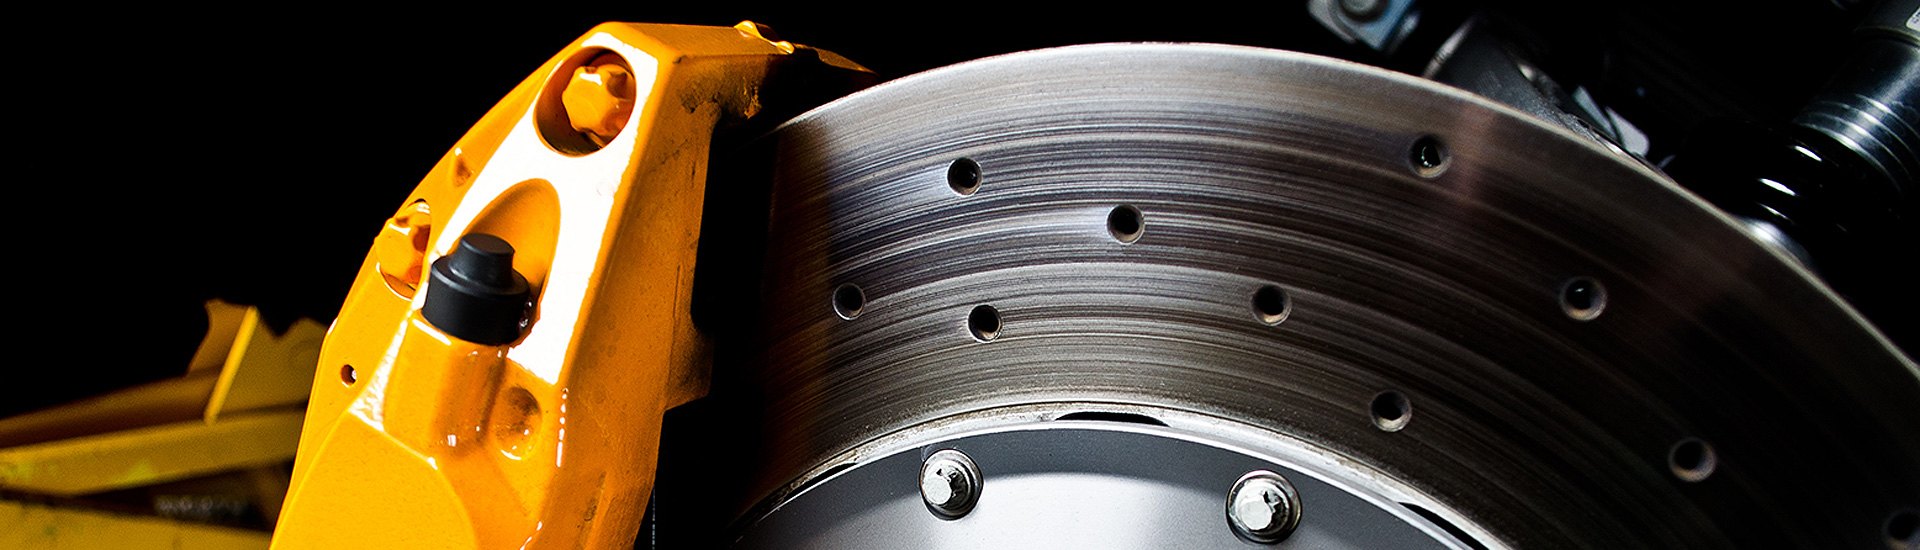 6 Signs It’s Time For New Brakes